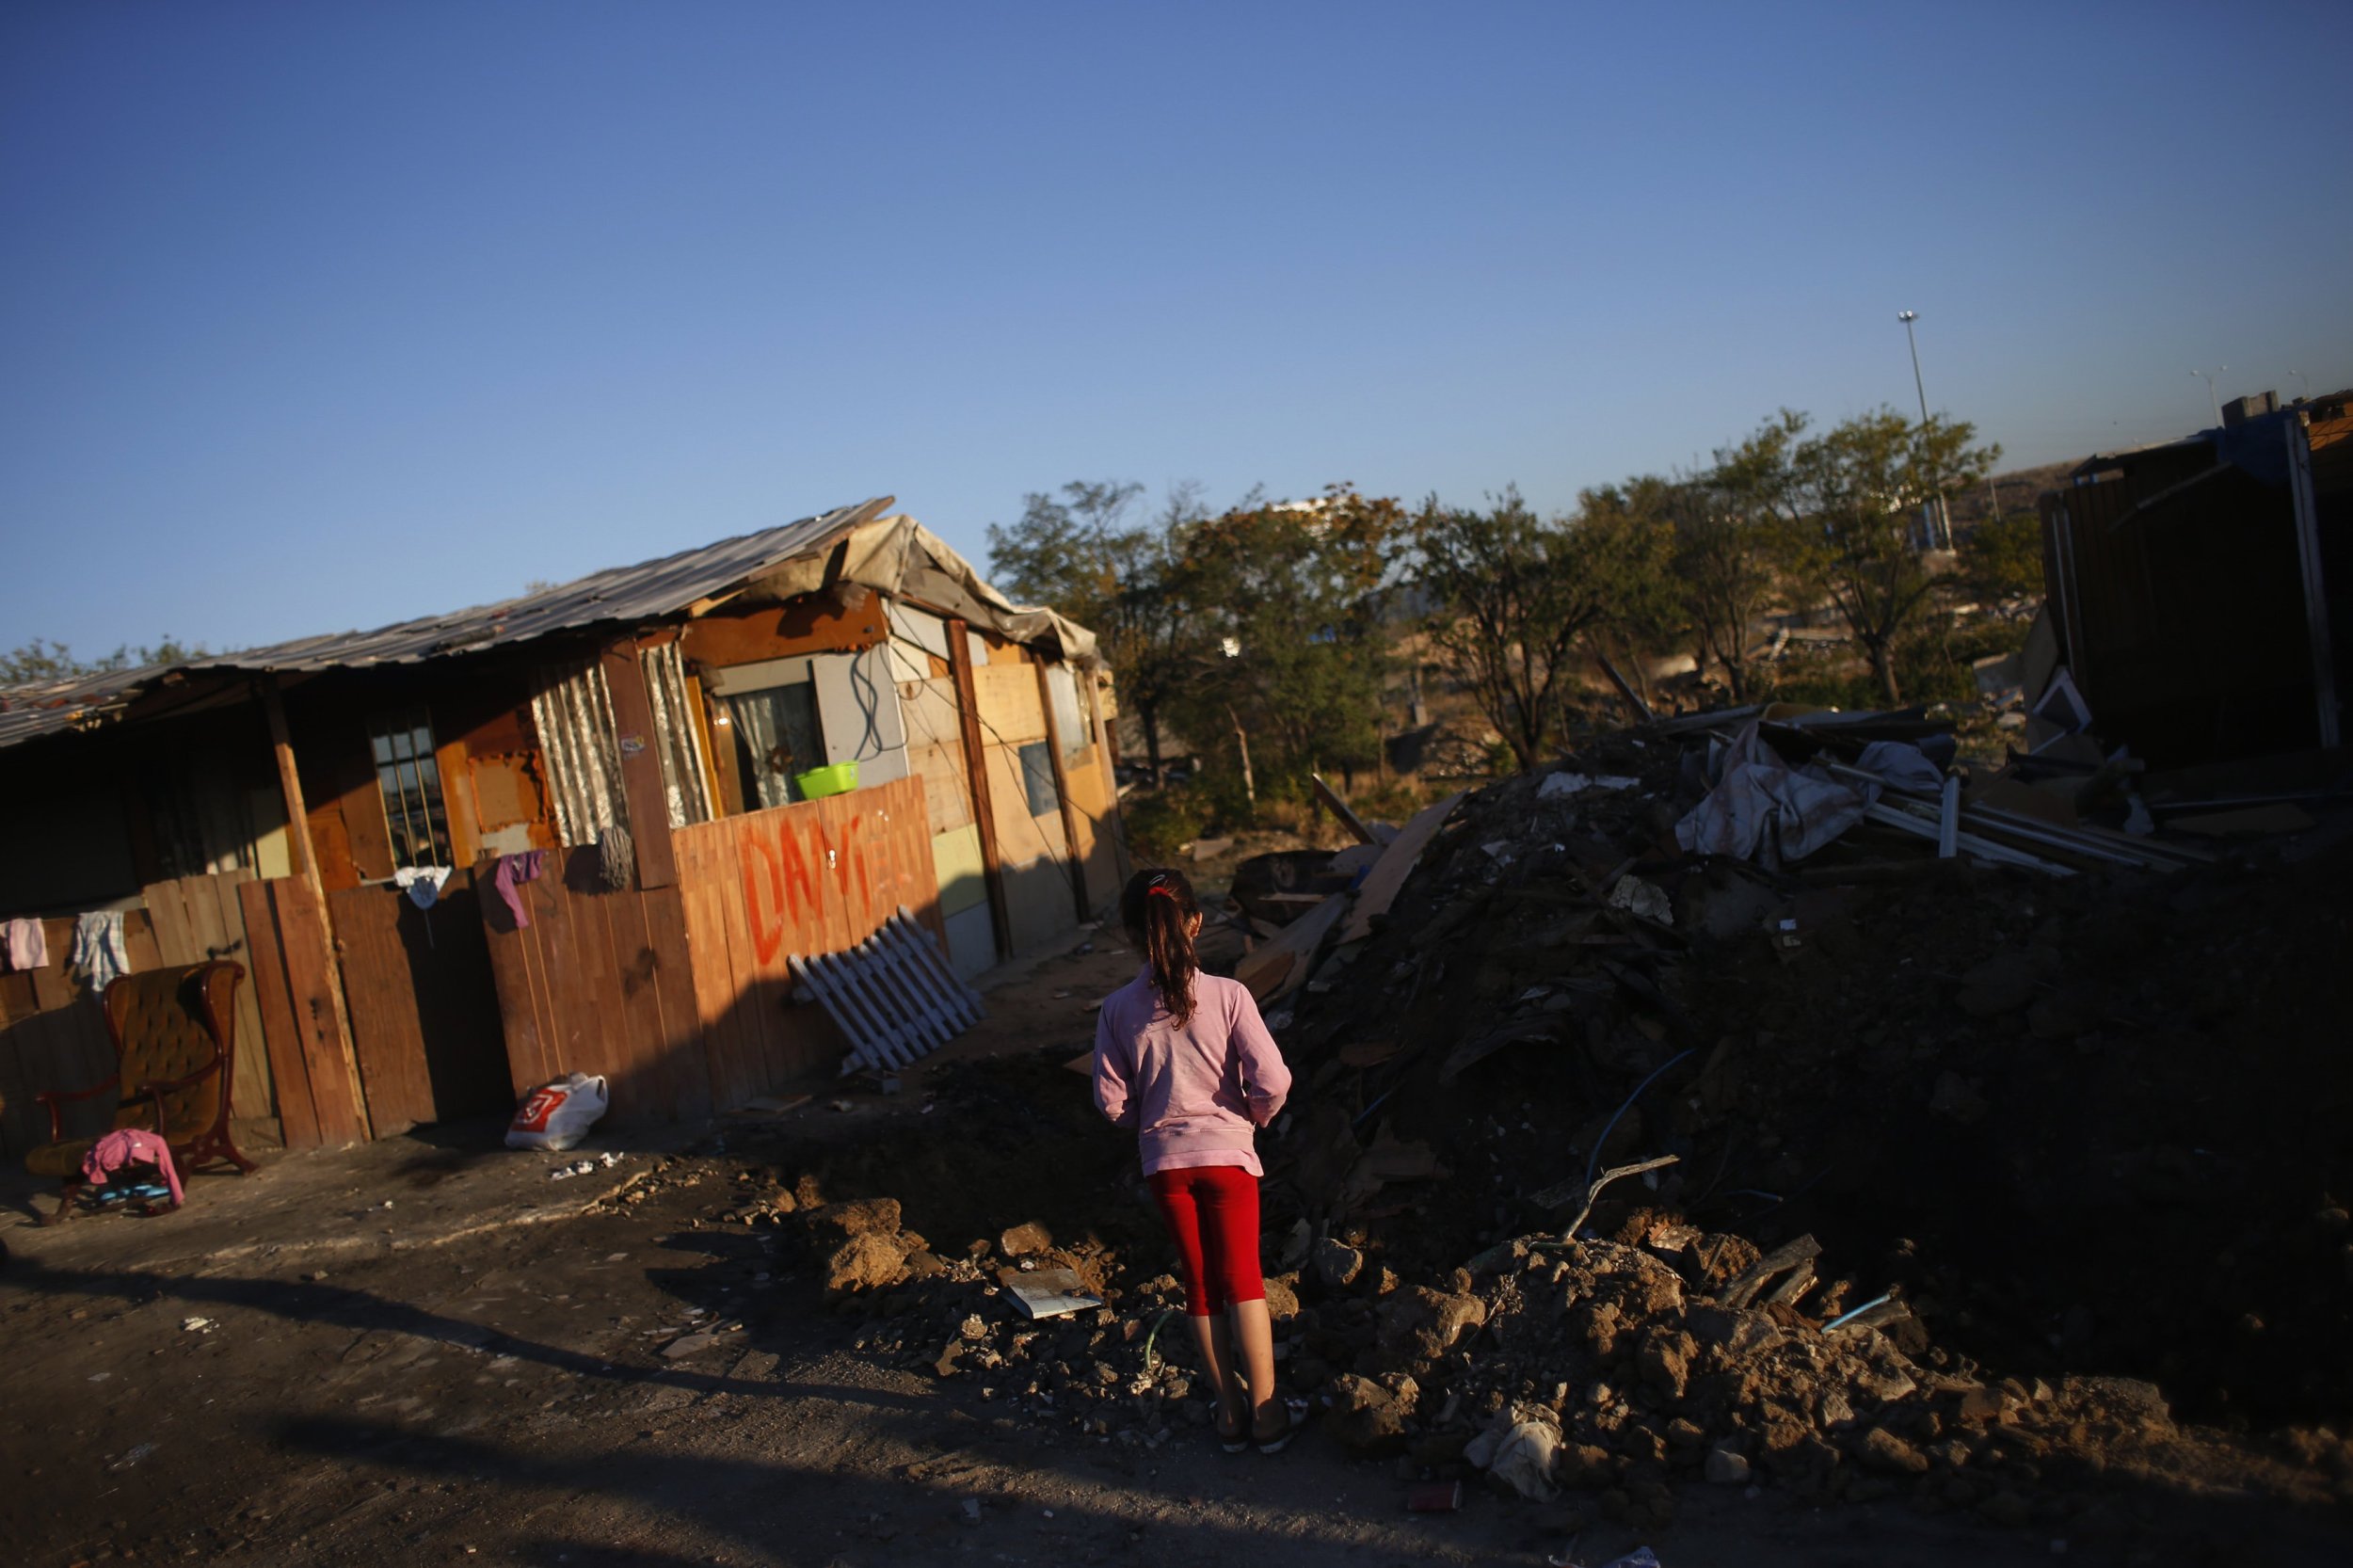 A girl looks at the remains of a relatives shack after it got demolished in by police in Madrids El Gallinero slum.